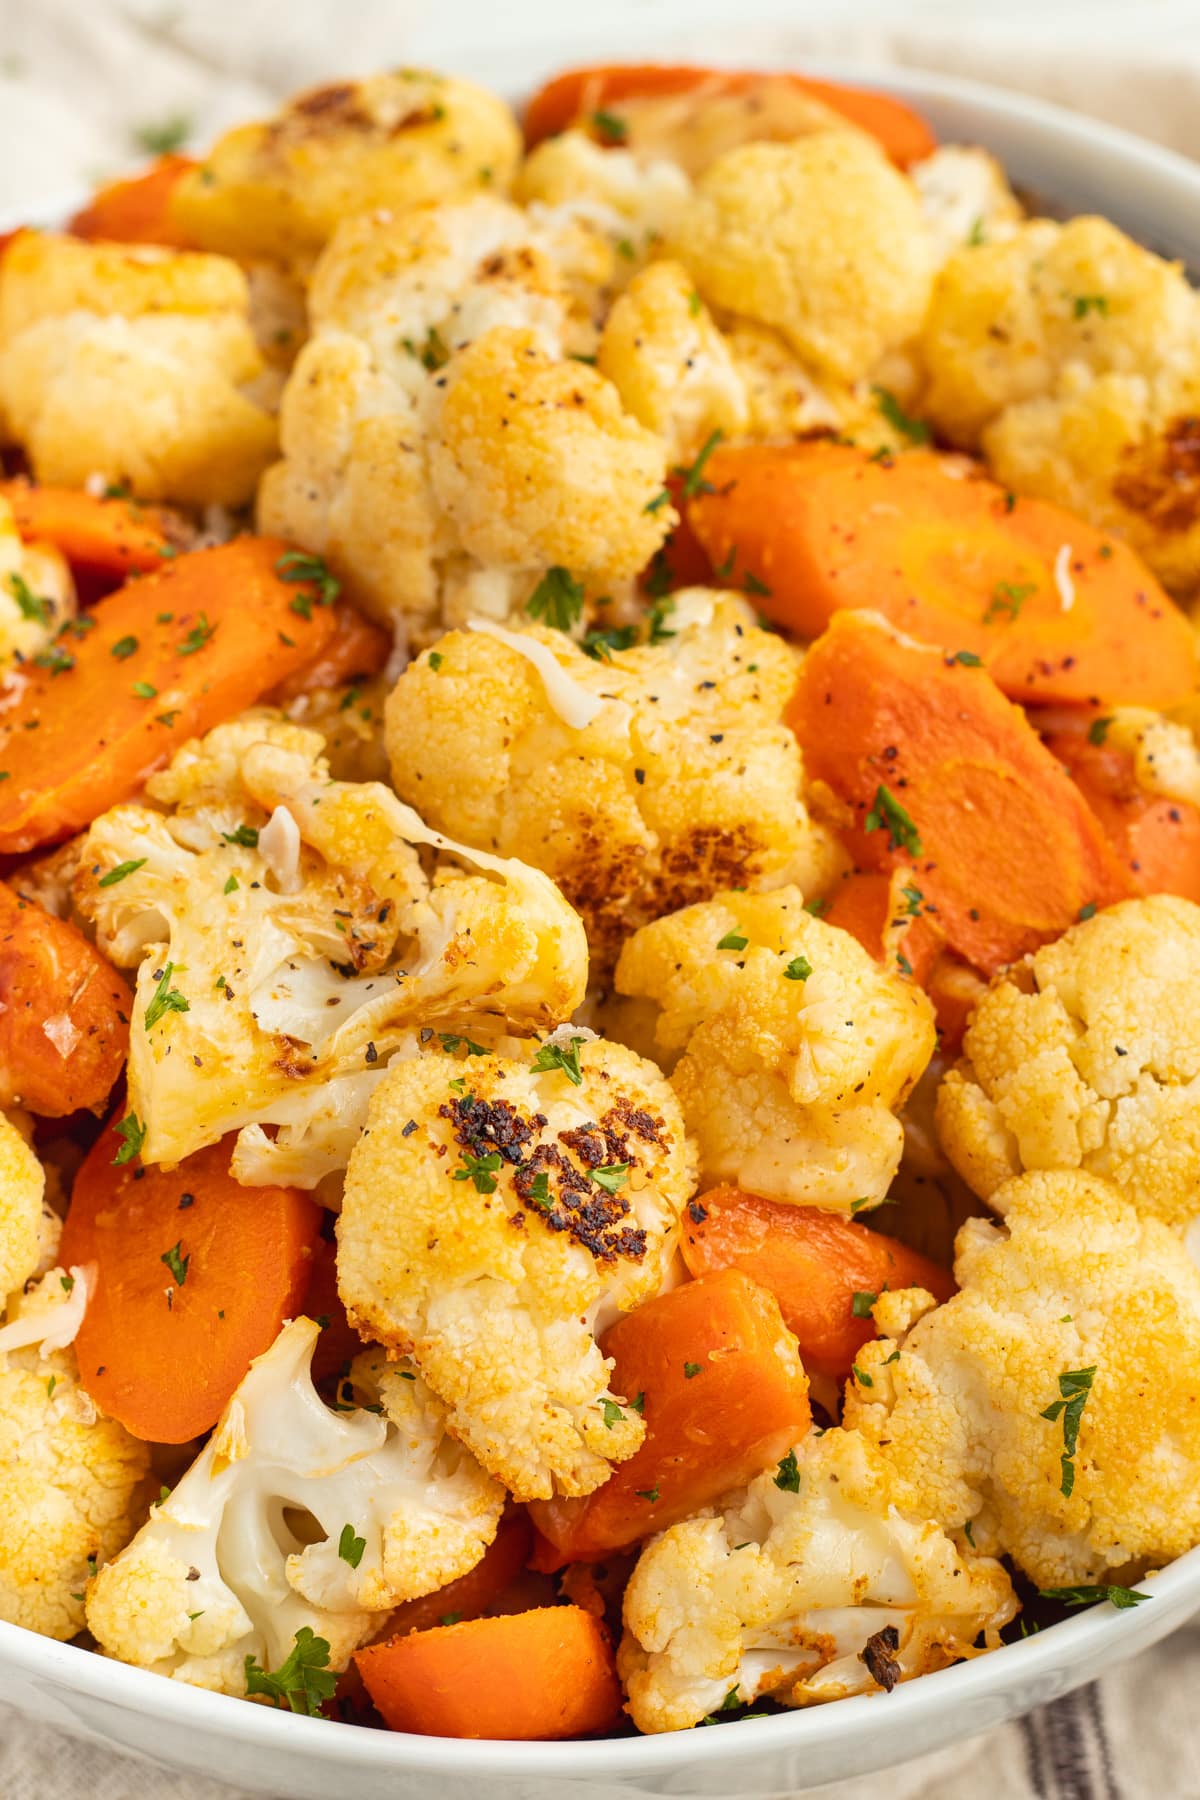 This is a picture of a bowl filled with cheesy carrots and cauliflower.